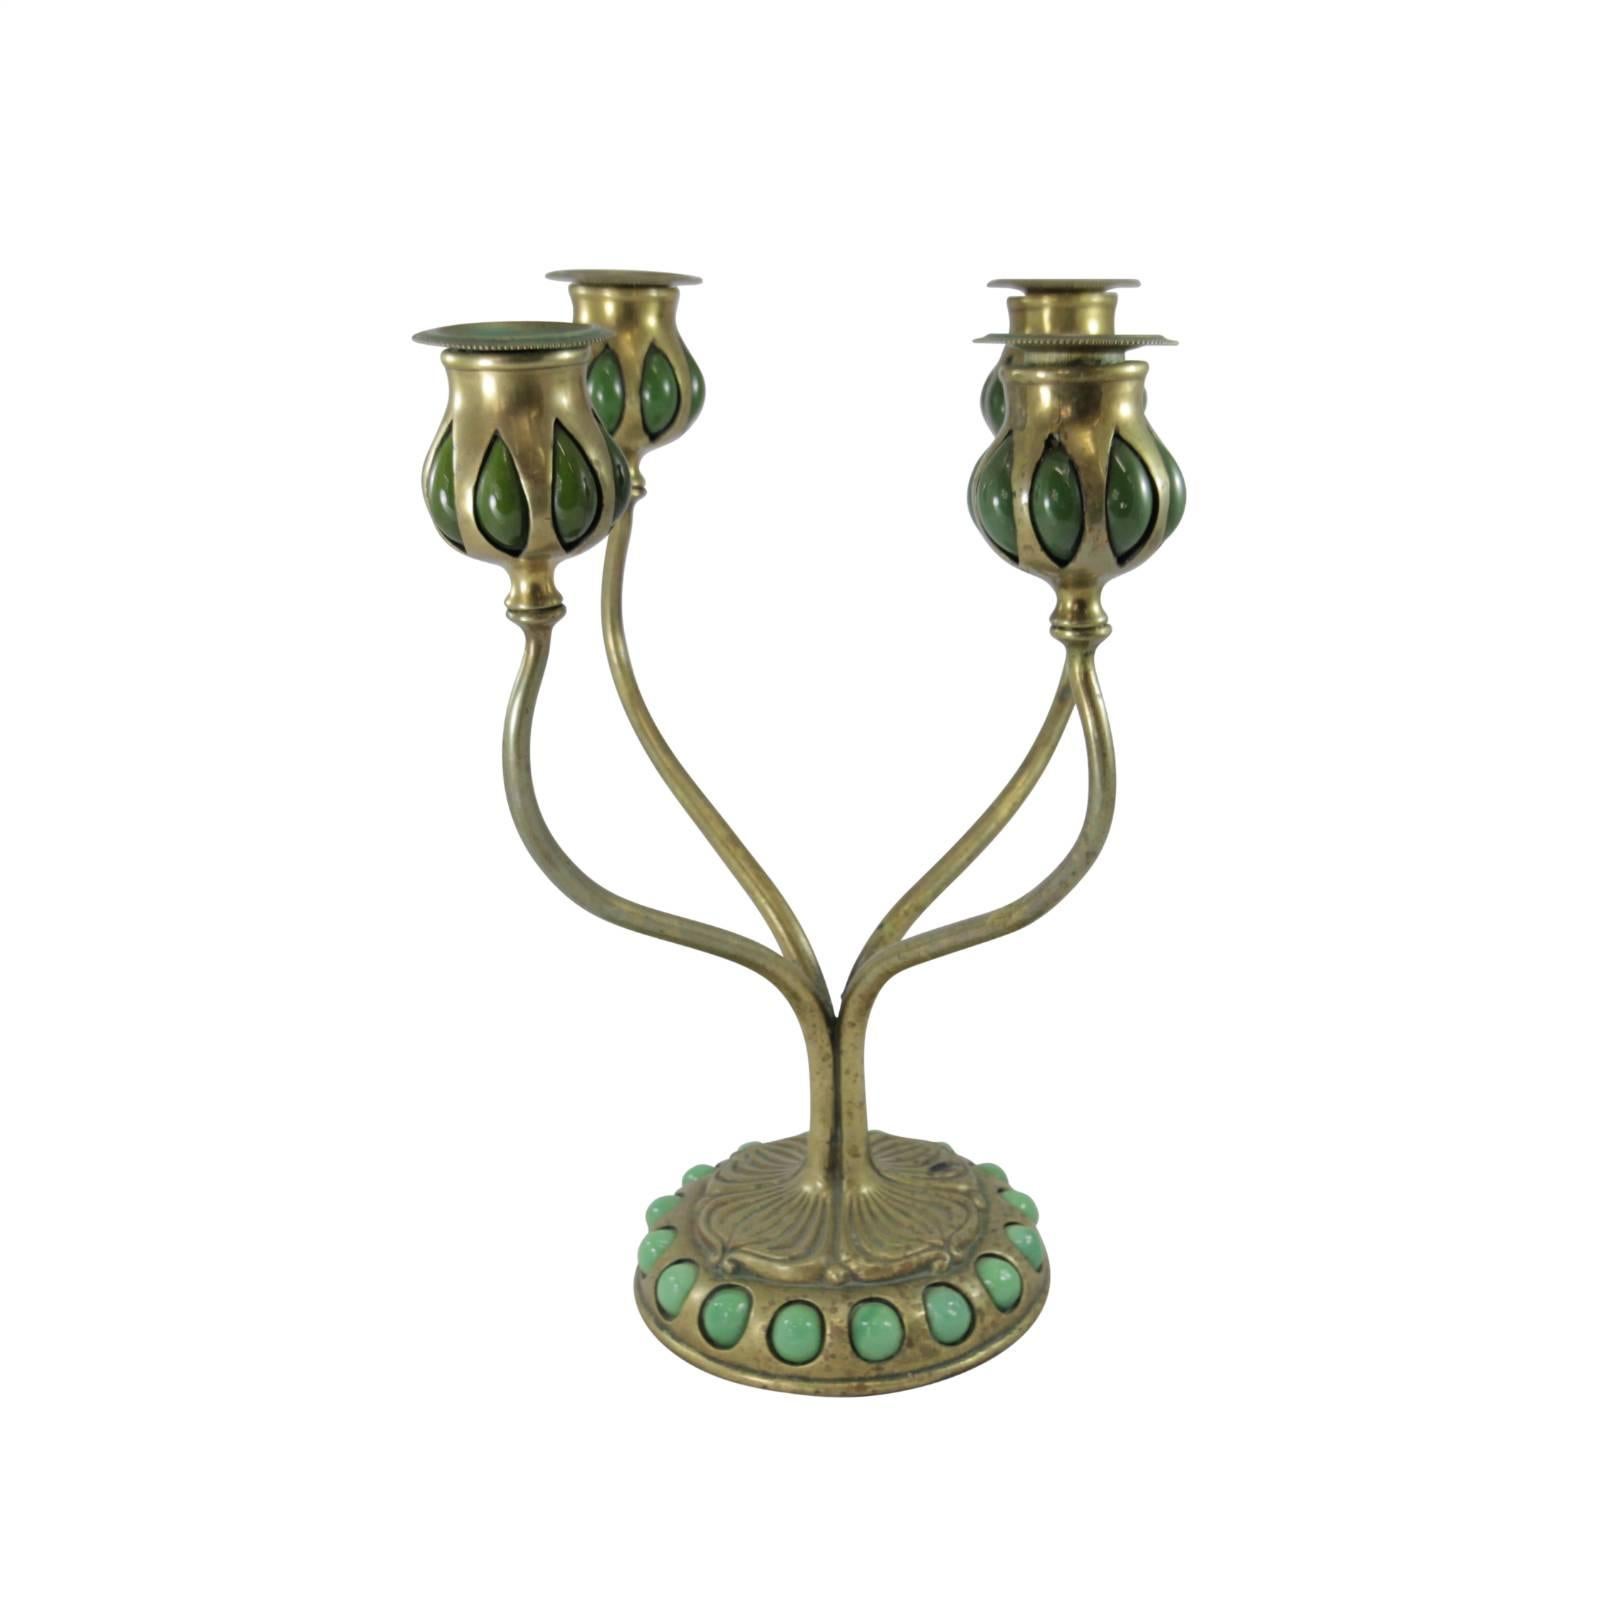 American Tiffany Studios Art Glass and Gilt Bronze Candelabra in the Art Nouveau Style For Sale